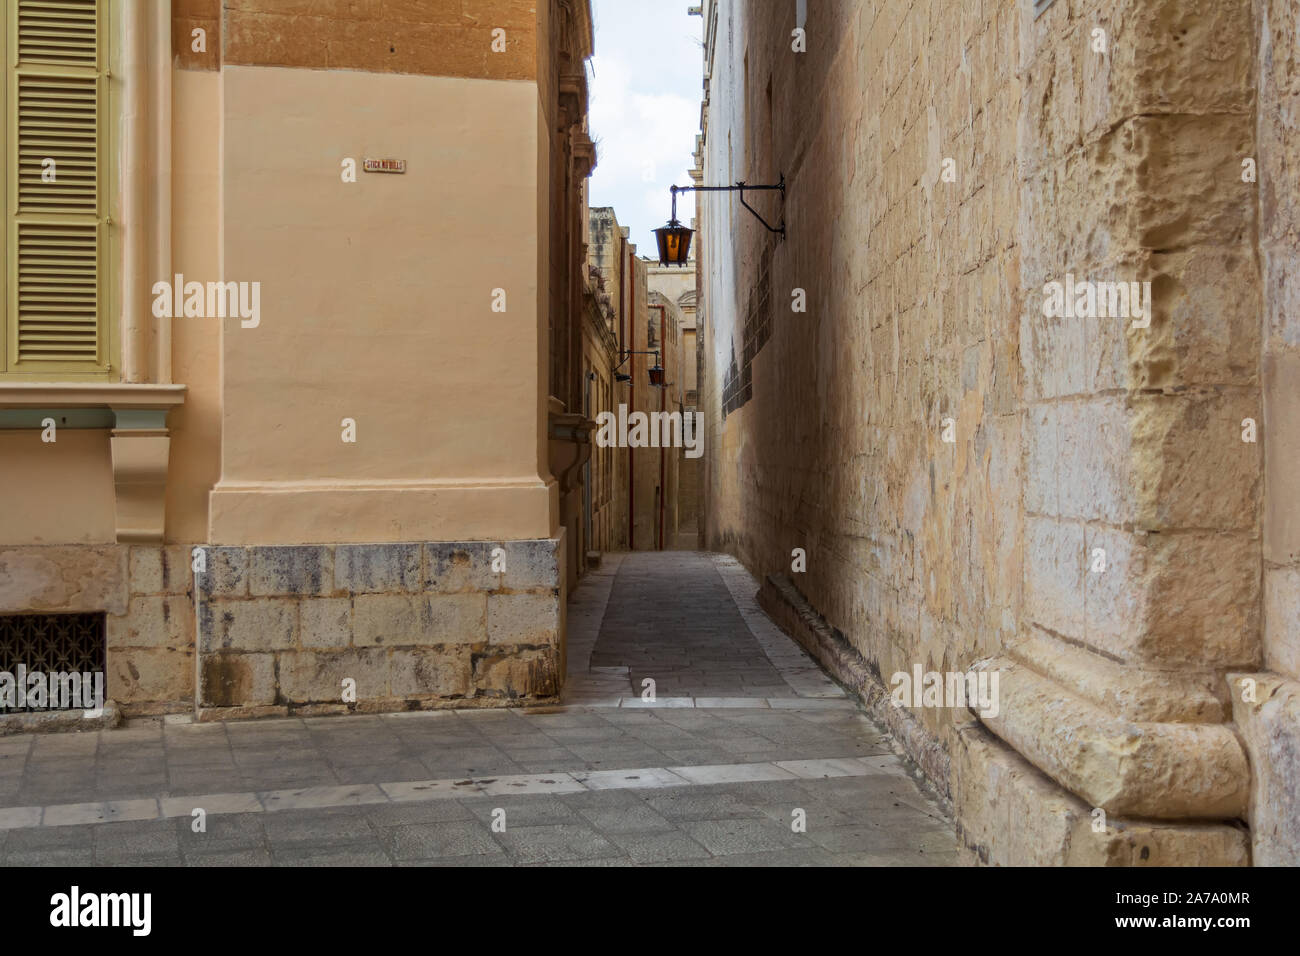 Typical Mdina street. Narrow medieval street of Mdina, also known as 'Silent city', paved with stone slabs and surrounded with yellow limestone walls, Stock Photo